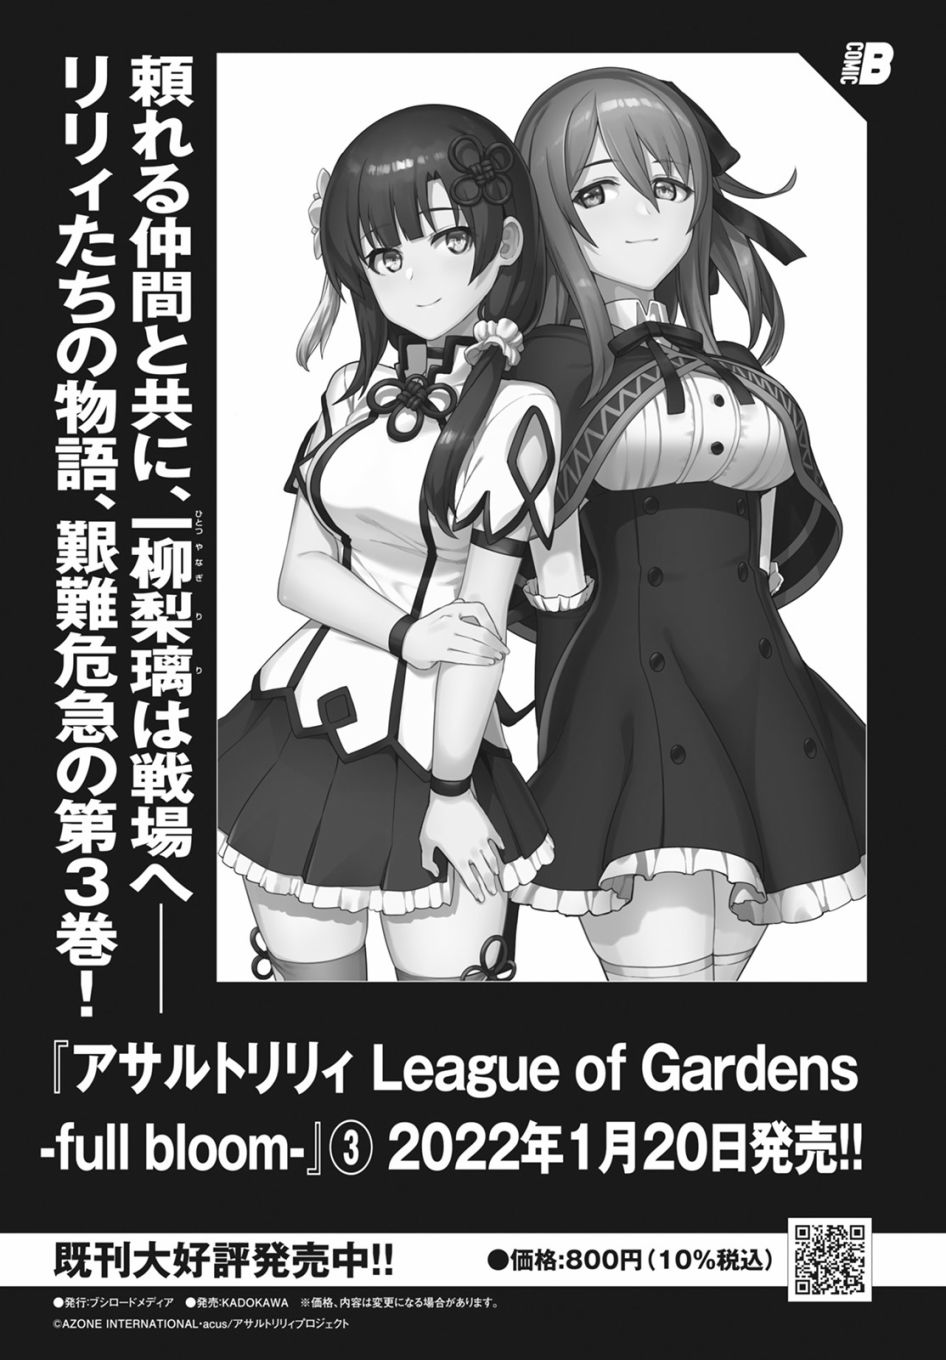 Assault LILY League of Gardens -full bloom- - 第17話 - 3